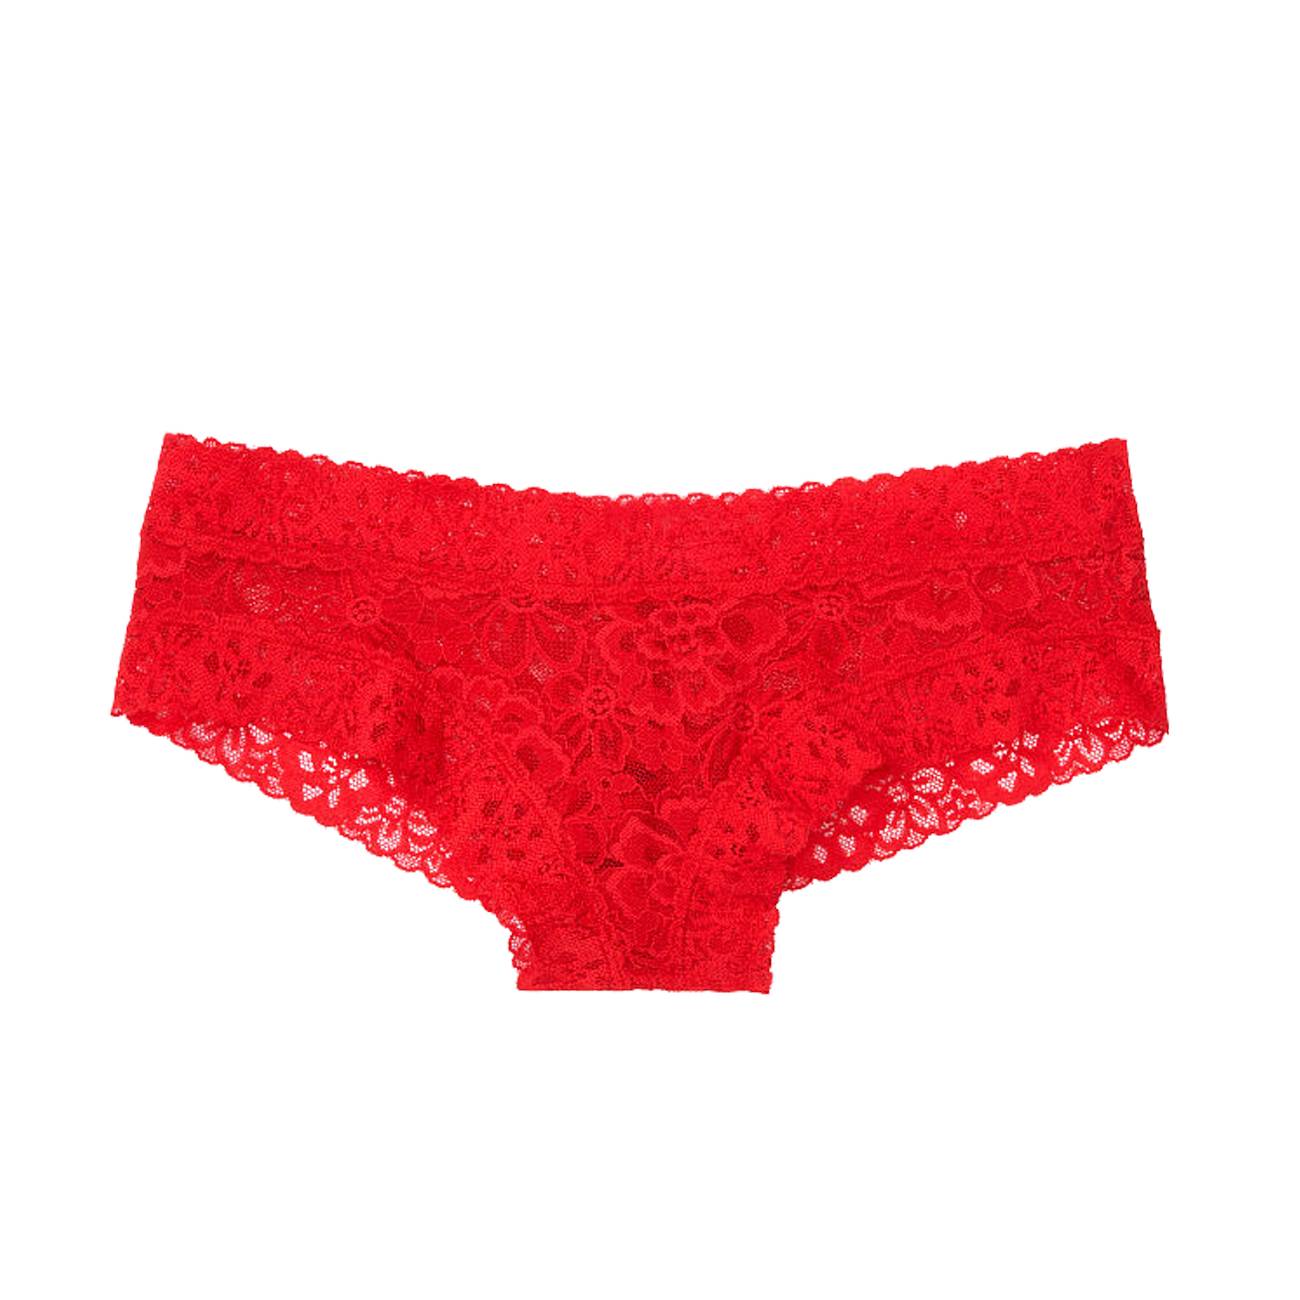 Floral Lace Cheeky Panty S bestvalue.eu